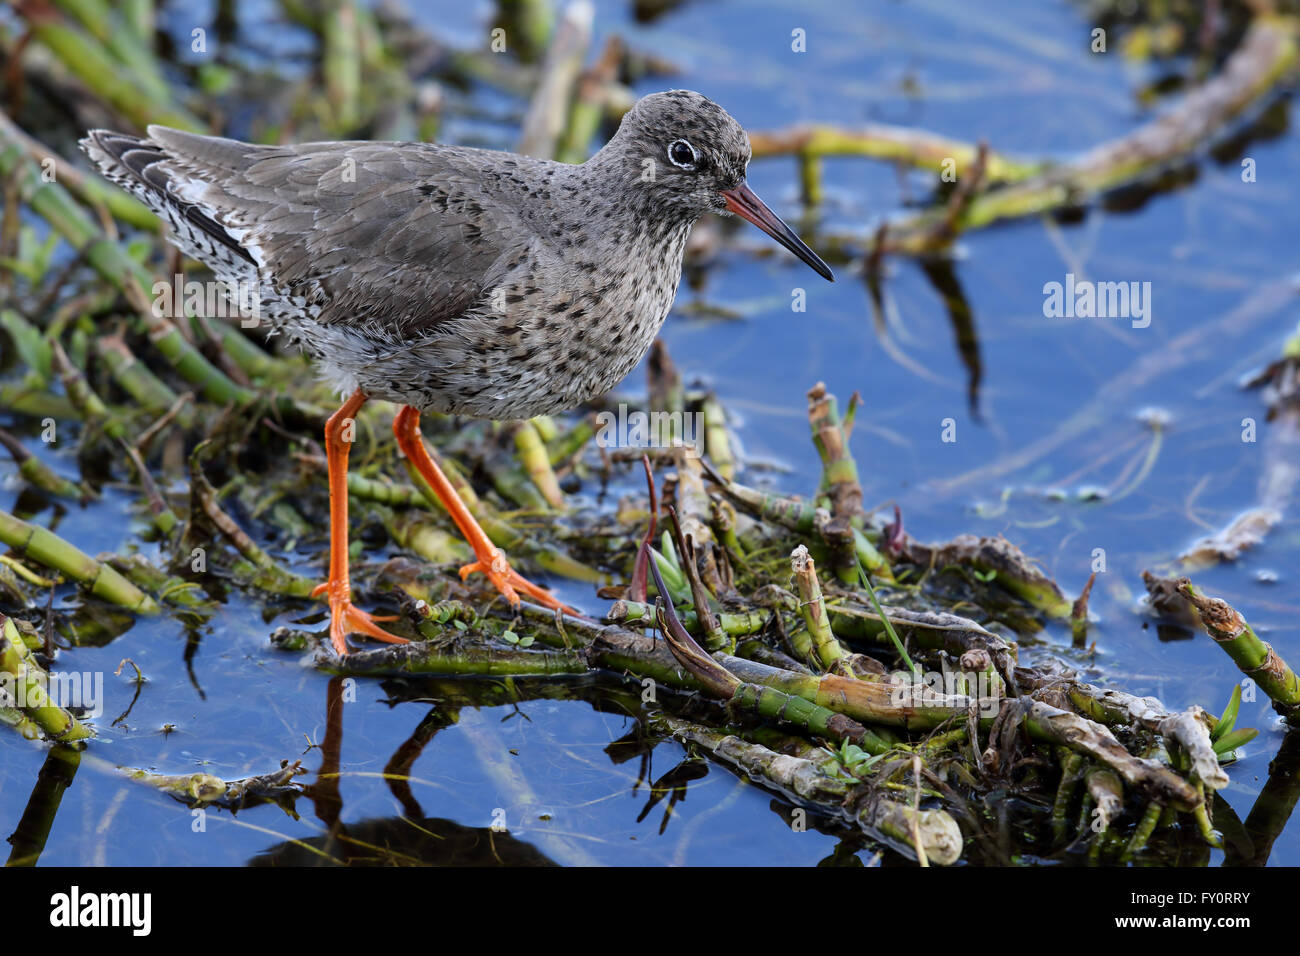 Wild Common Redshank (Tringa totanus) is a Eurasian wader in the large family Scolopacidae. Stood amongst a bogbean plant. Stock Photo